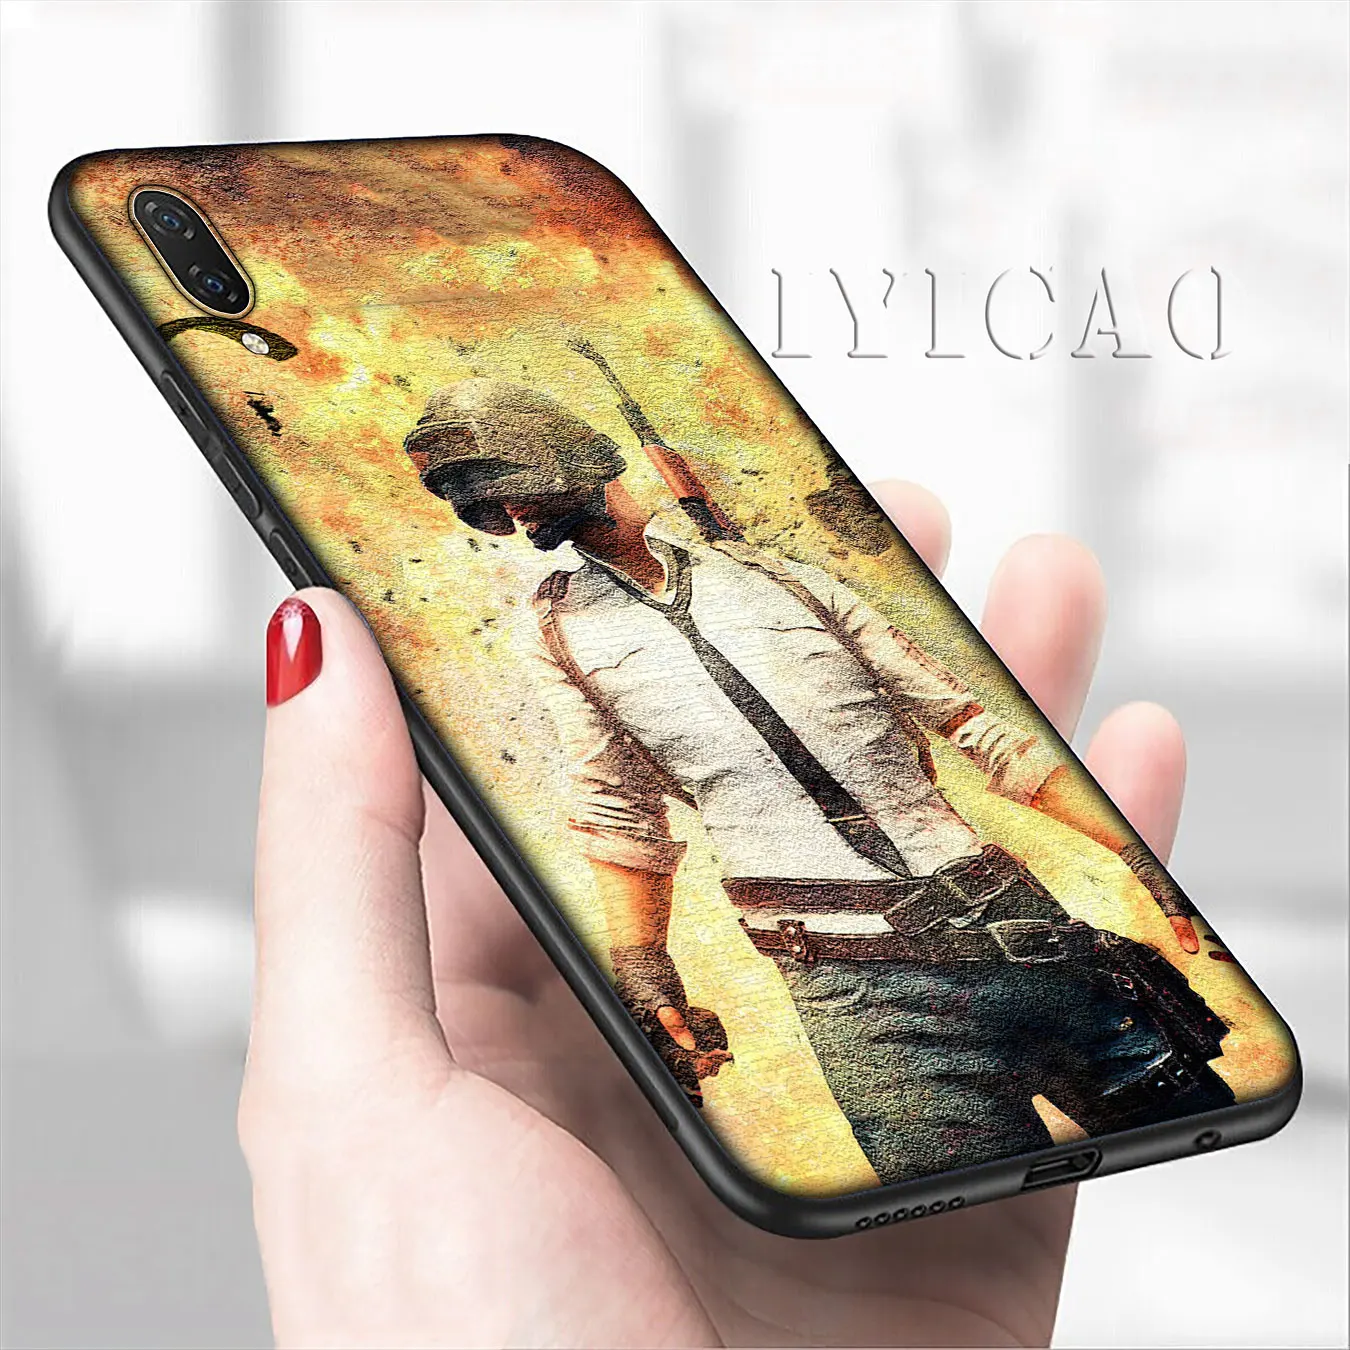 IYICAO PUBG 98K Game Art Soft Phone Case for Xiaomi Mi 10 9 9T A3 Pro CC9 CC9E 8 SE A2 Lite A1 6 pocophone f1 Mi9 |